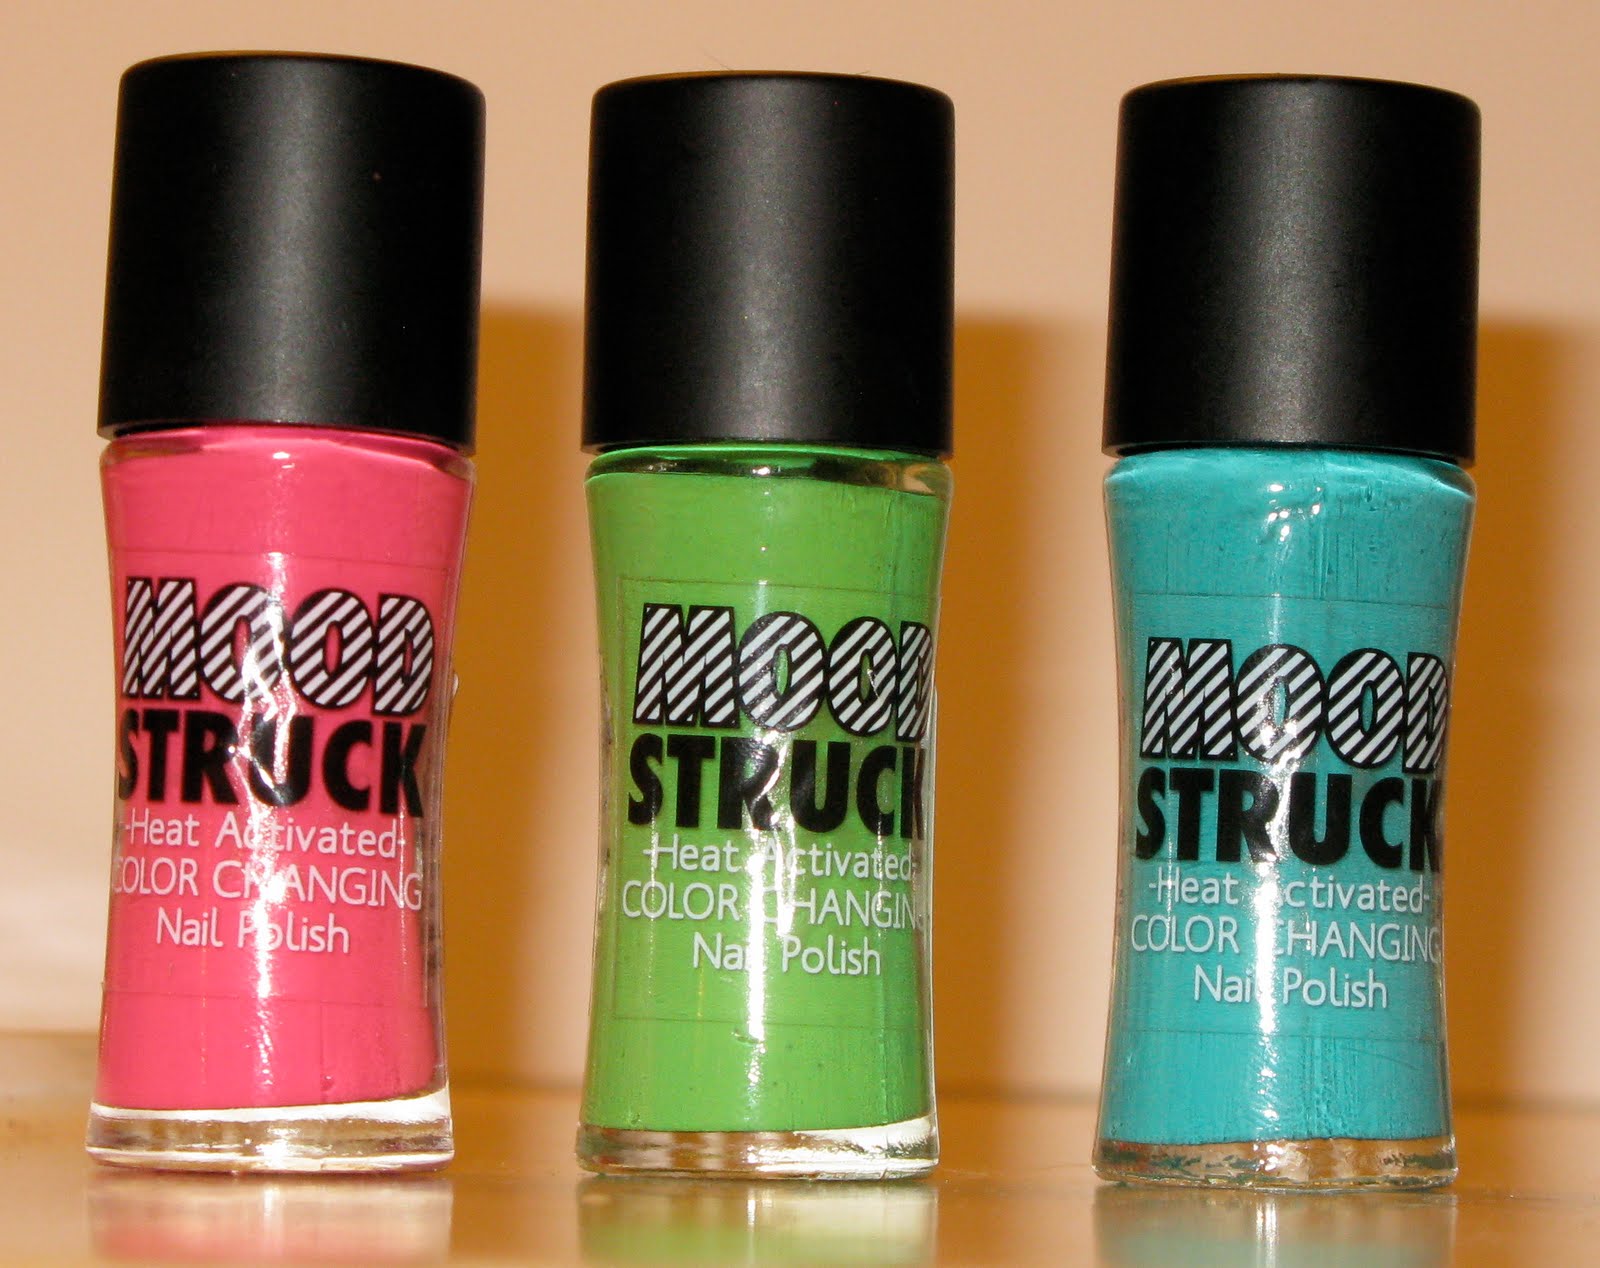 5. ILNP Color Changing Nail Polish - wide 2